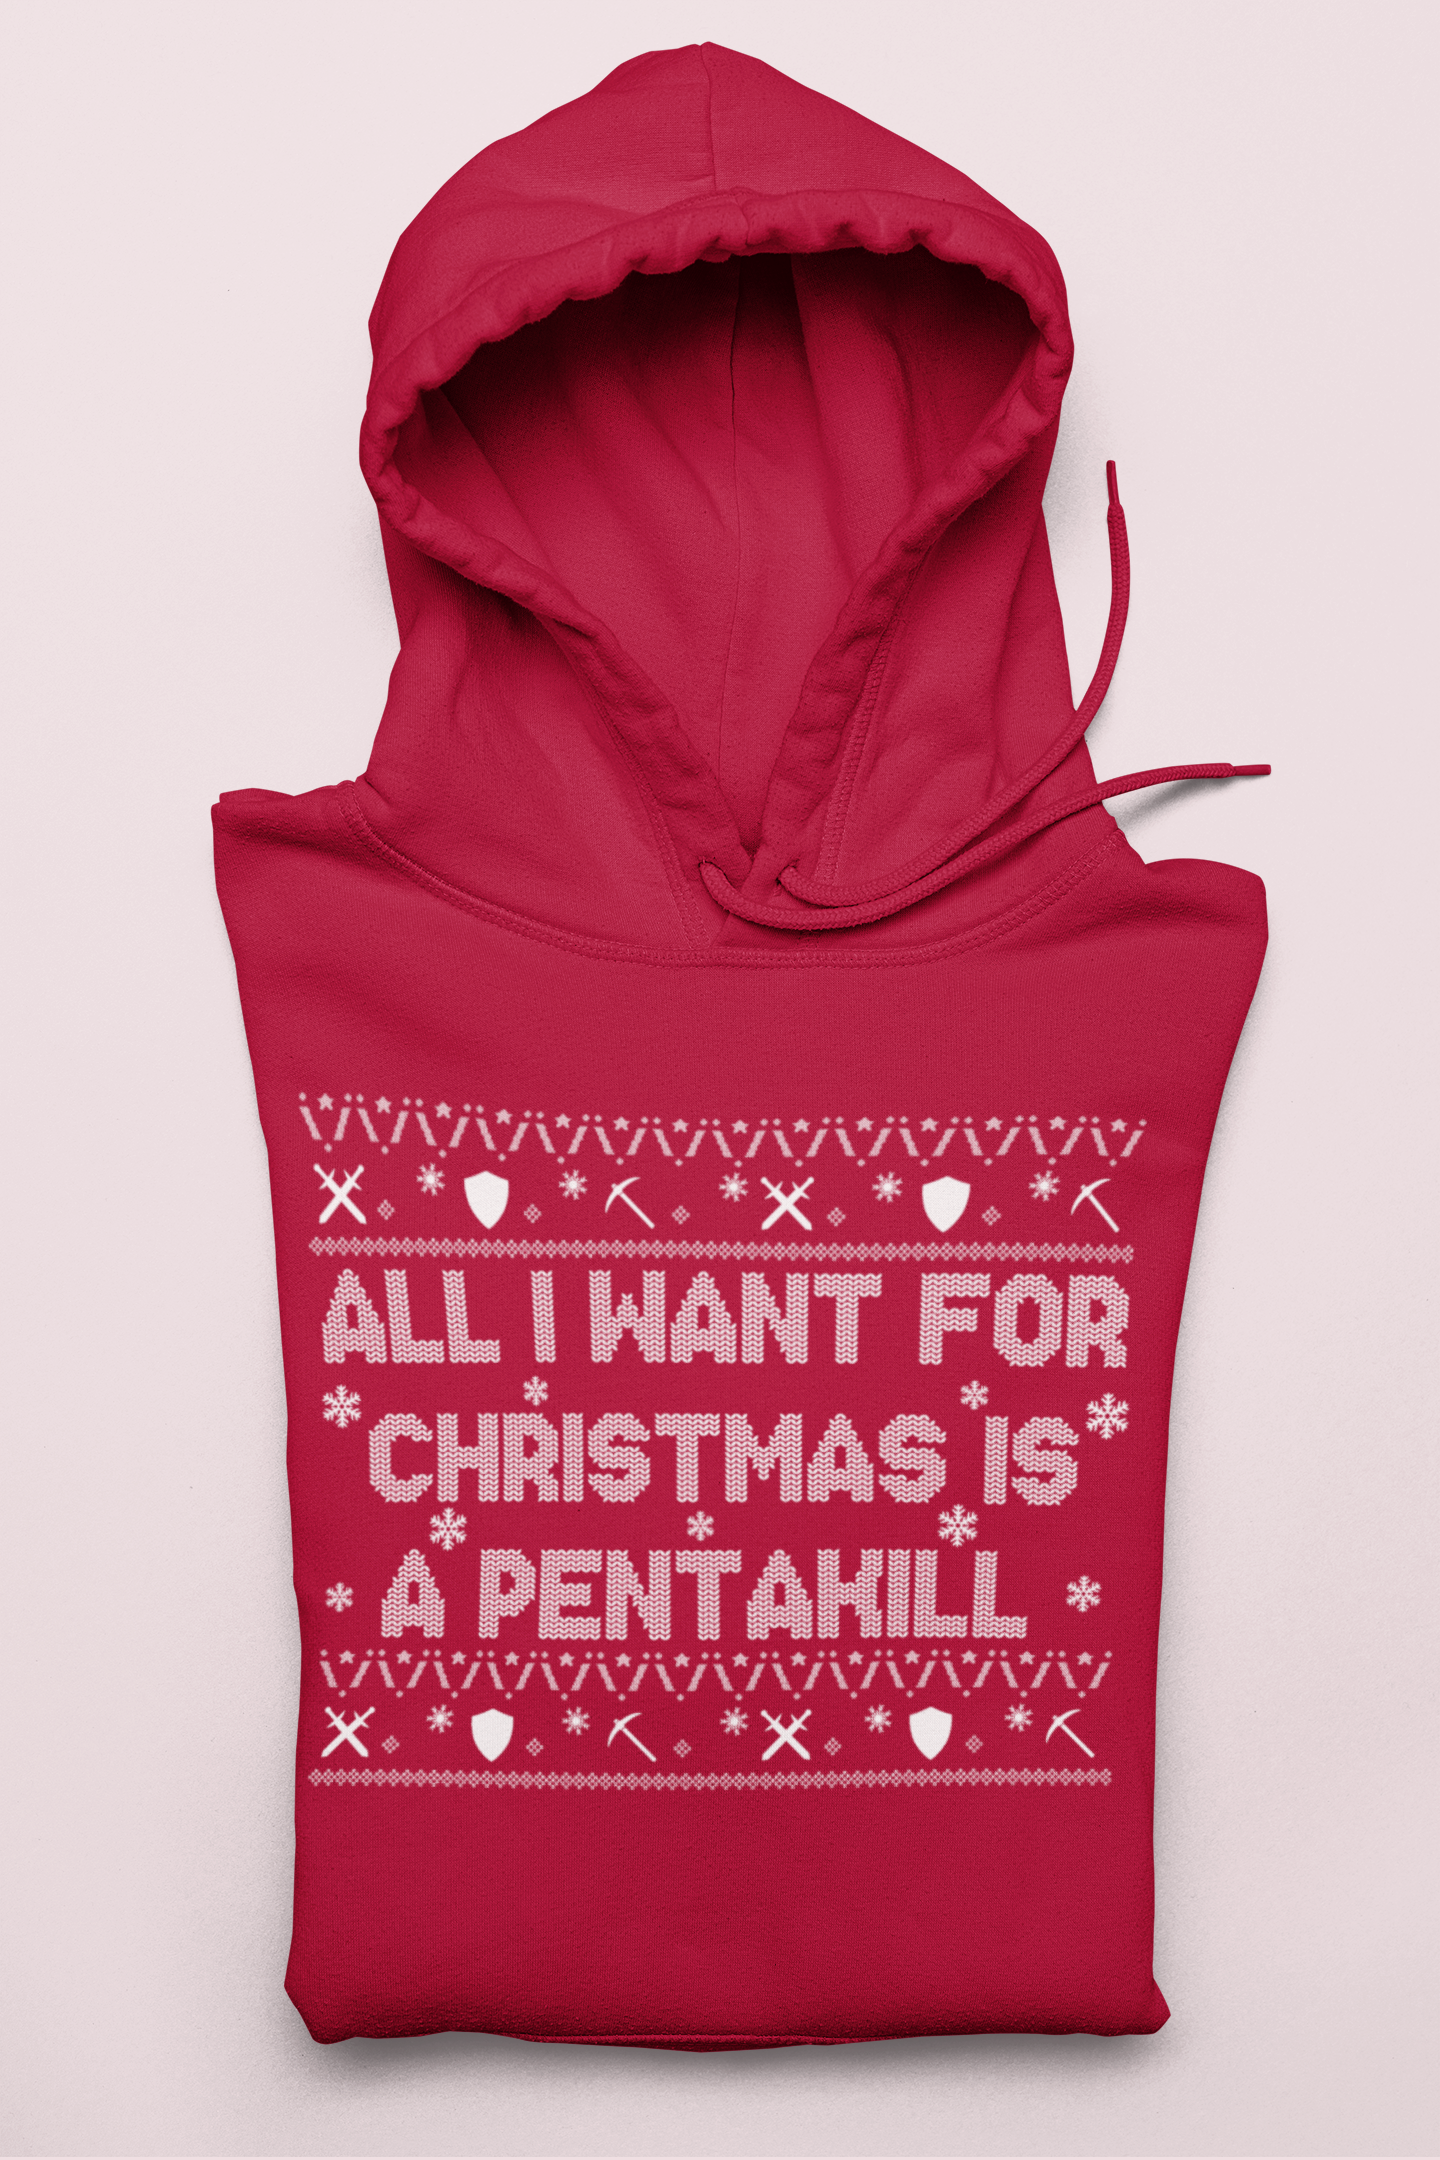 Red hoodie saying all i want for christmas is a pentakill - HighCiti